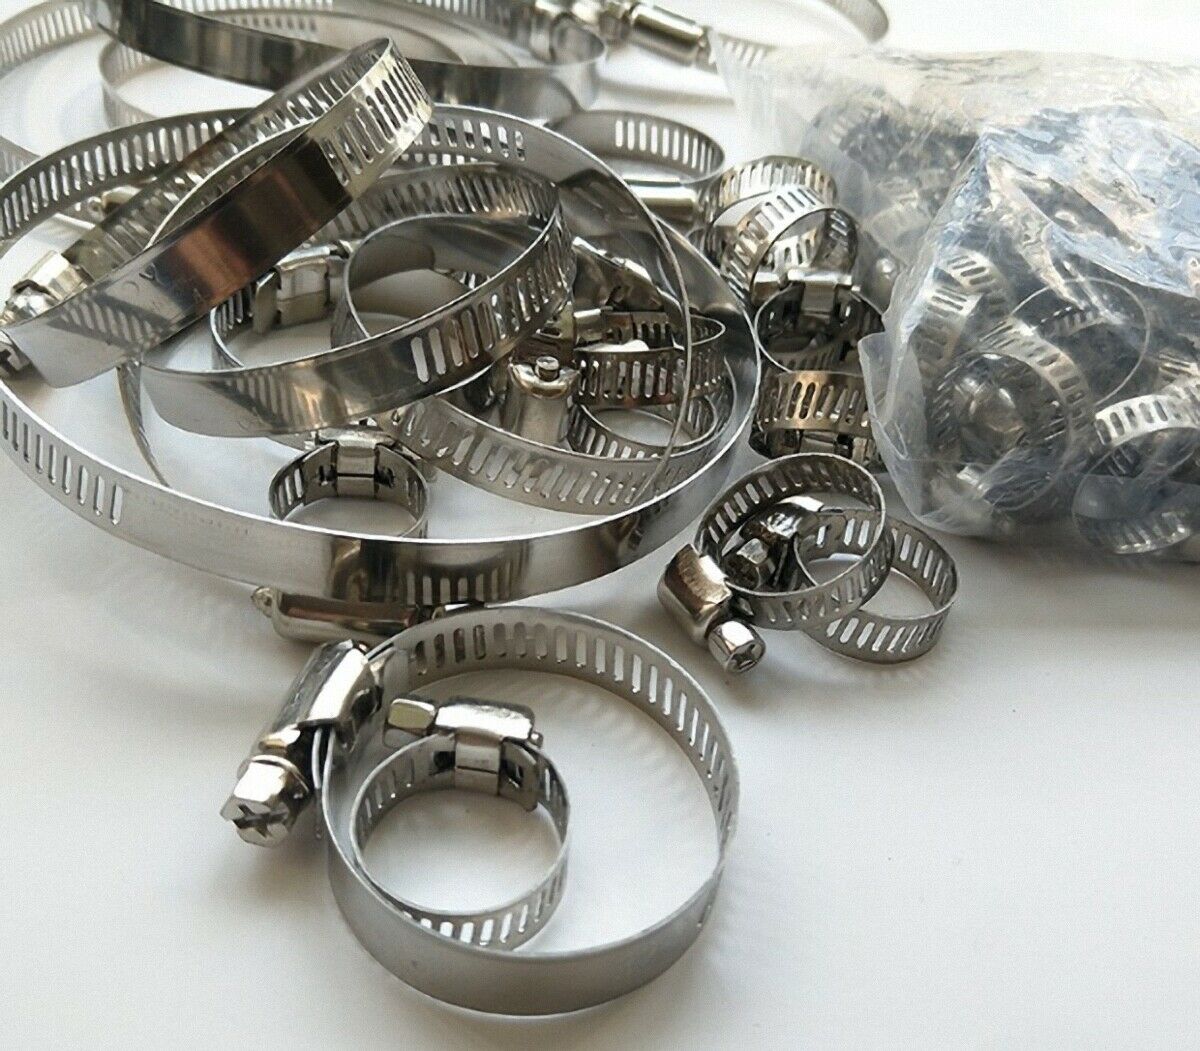 34 Pcs (8-44mm) Stainless Steel Drive Hose Clamps Worm Clips [M_M_S]